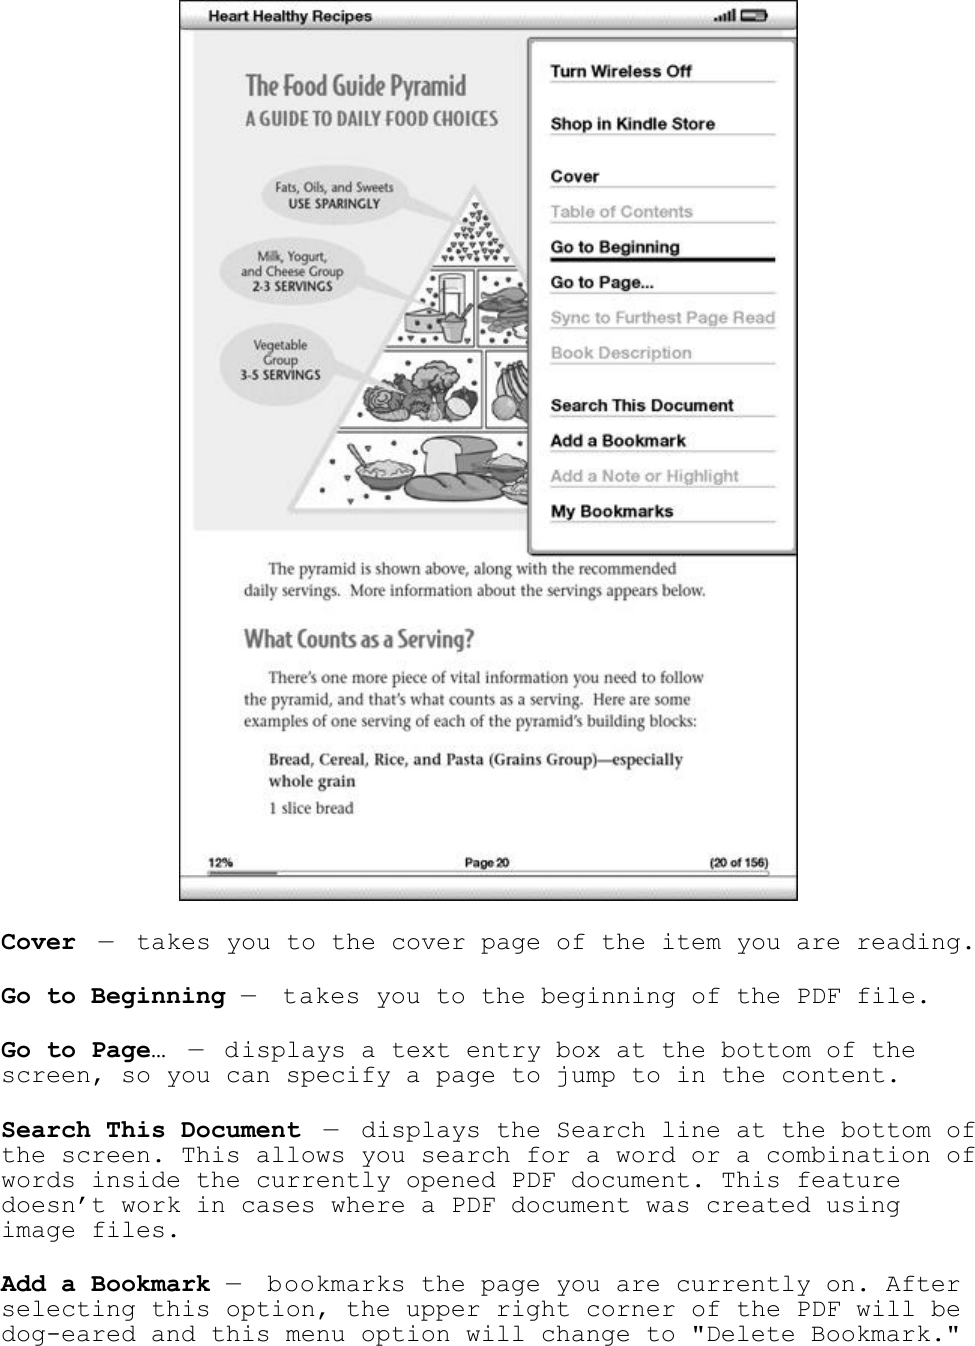    Cover — takes you to the cover page of the item you are reading.  Go to Beginning —  takes you to the beginning of the PDF file.  Go to Page… — displays a text entry box at the bottom of the screen, so you can specify a page to jump to in the content.  Search This Document —  displays the Search line at the bottom of the screen. This allows you search for a word or a combination of words inside the currently opened PDF document. This feature doesn’t work in cases where a PDF document was created using image files. Add a Bookmark —  bookmarks the page you are currently on. After selecting this option, the upper right corner of the PDF will be dog-eared and this menu option will change to &quot;Delete Bookmark.&quot; 